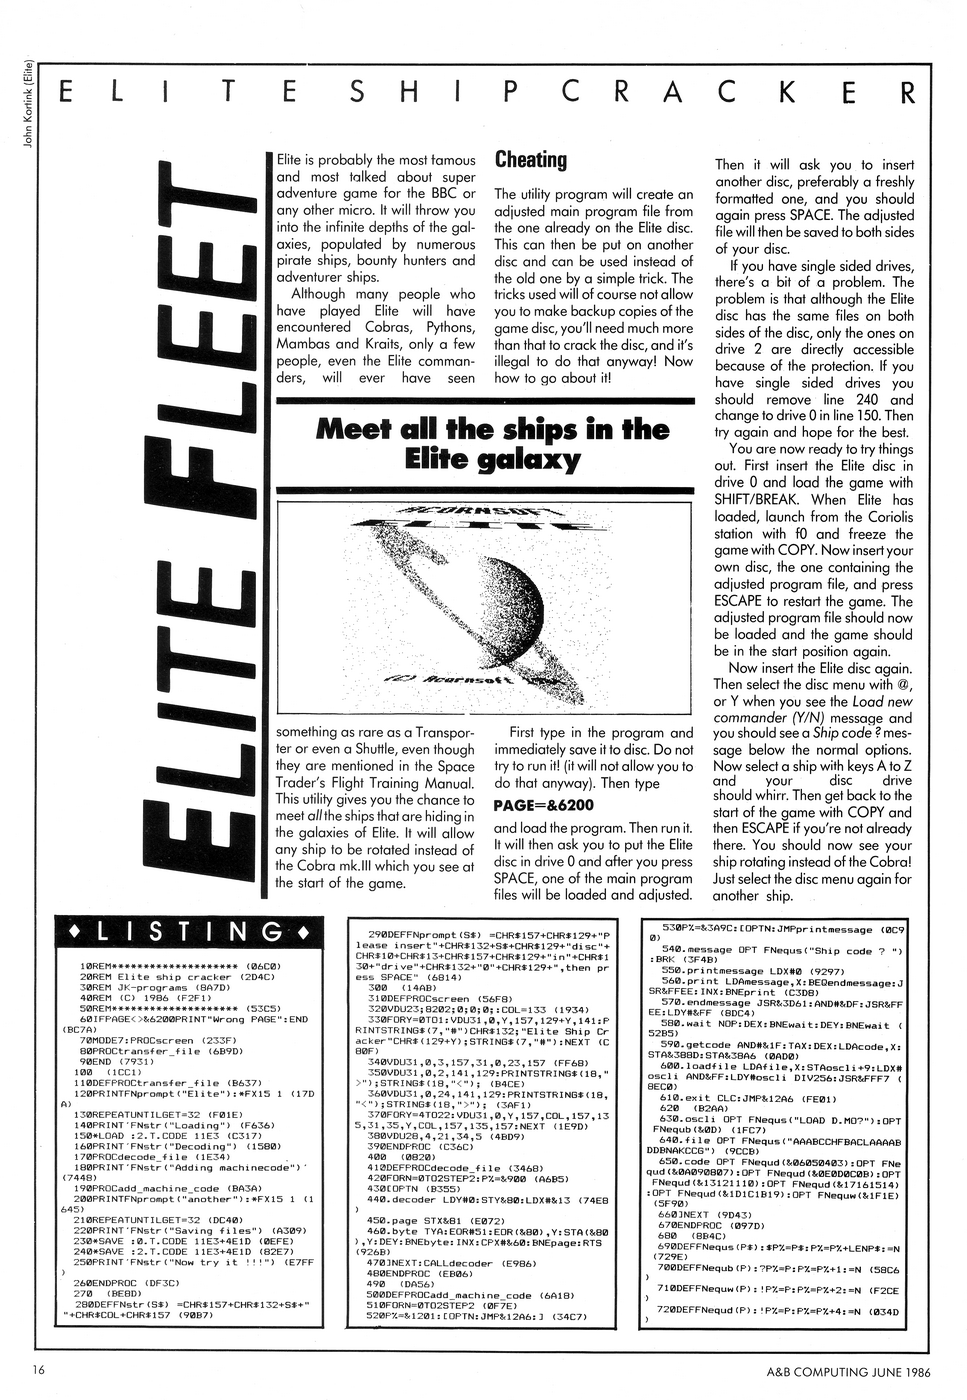 Article page 1/1 (click for magazine front)